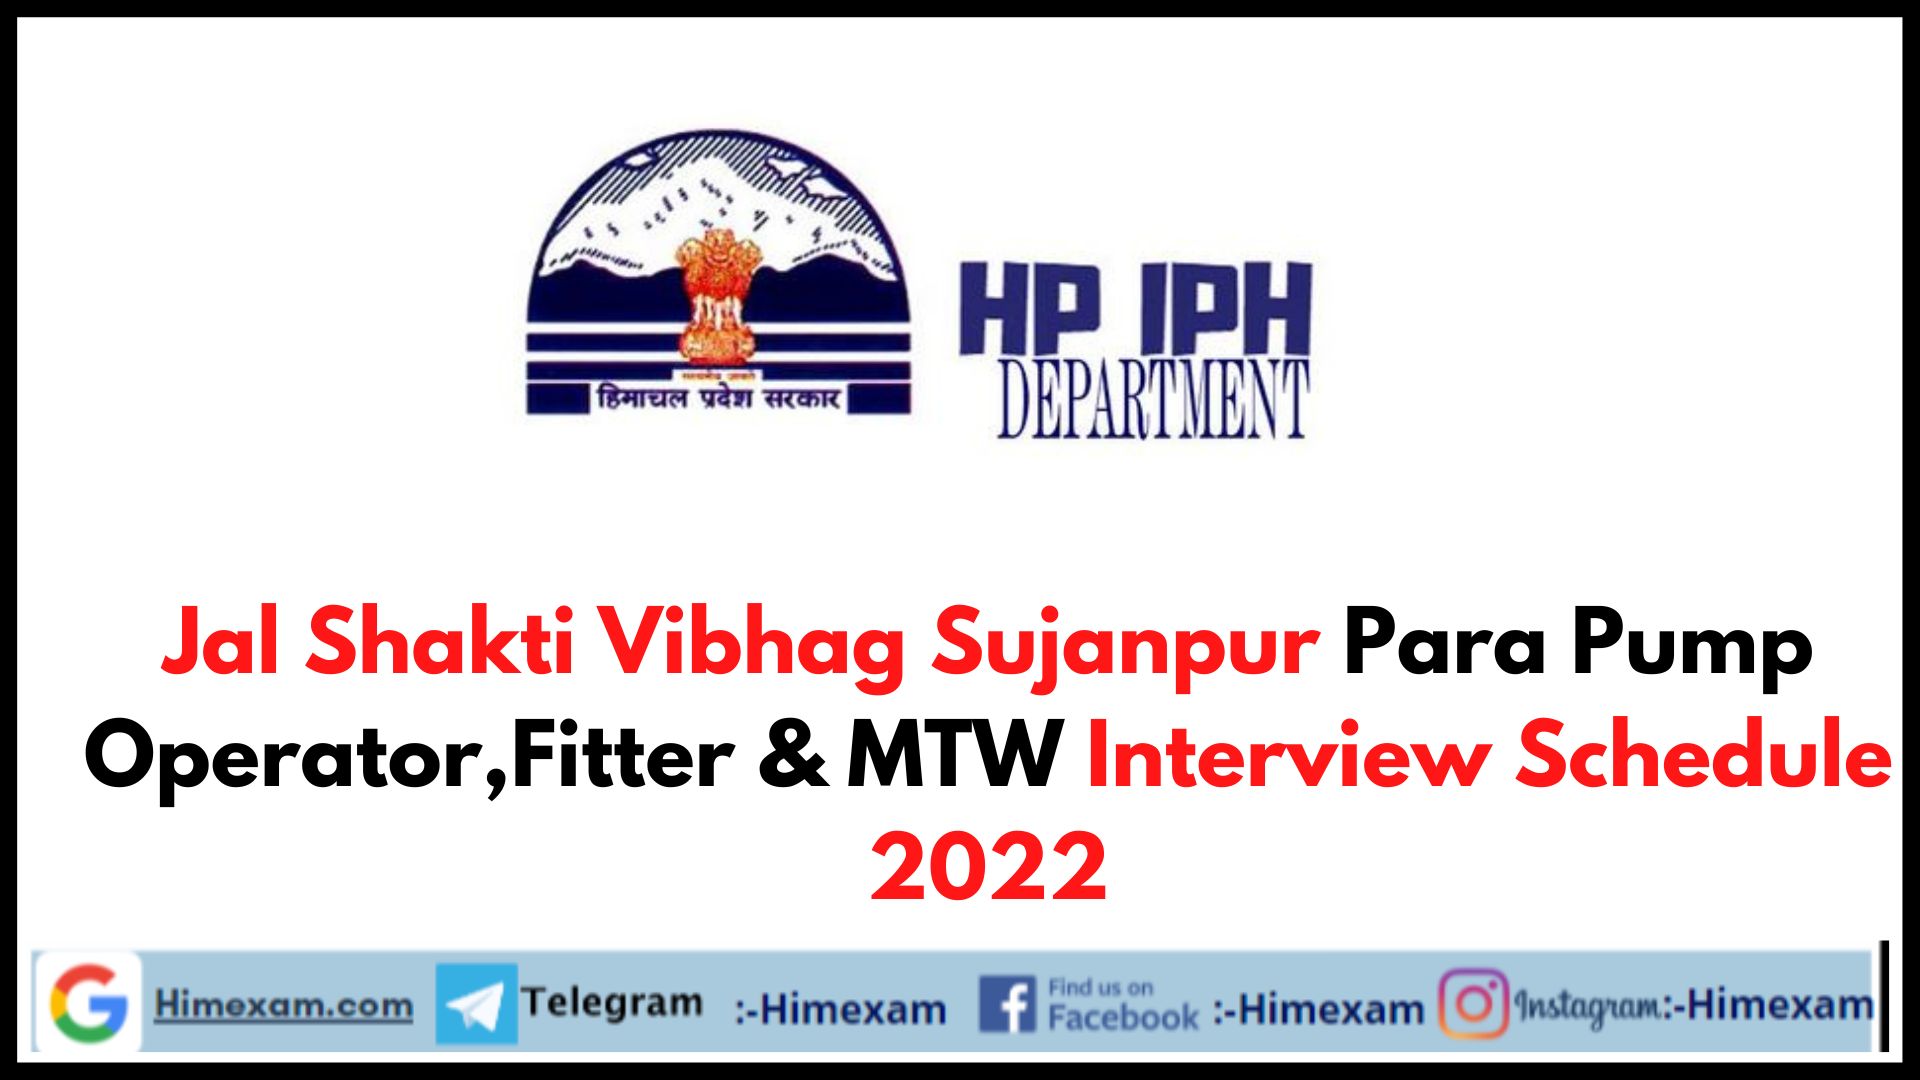 Jal Shakti Vibhag Sujanpur Para Pump Operator,Fitter & MTW Interview Schedule 2022